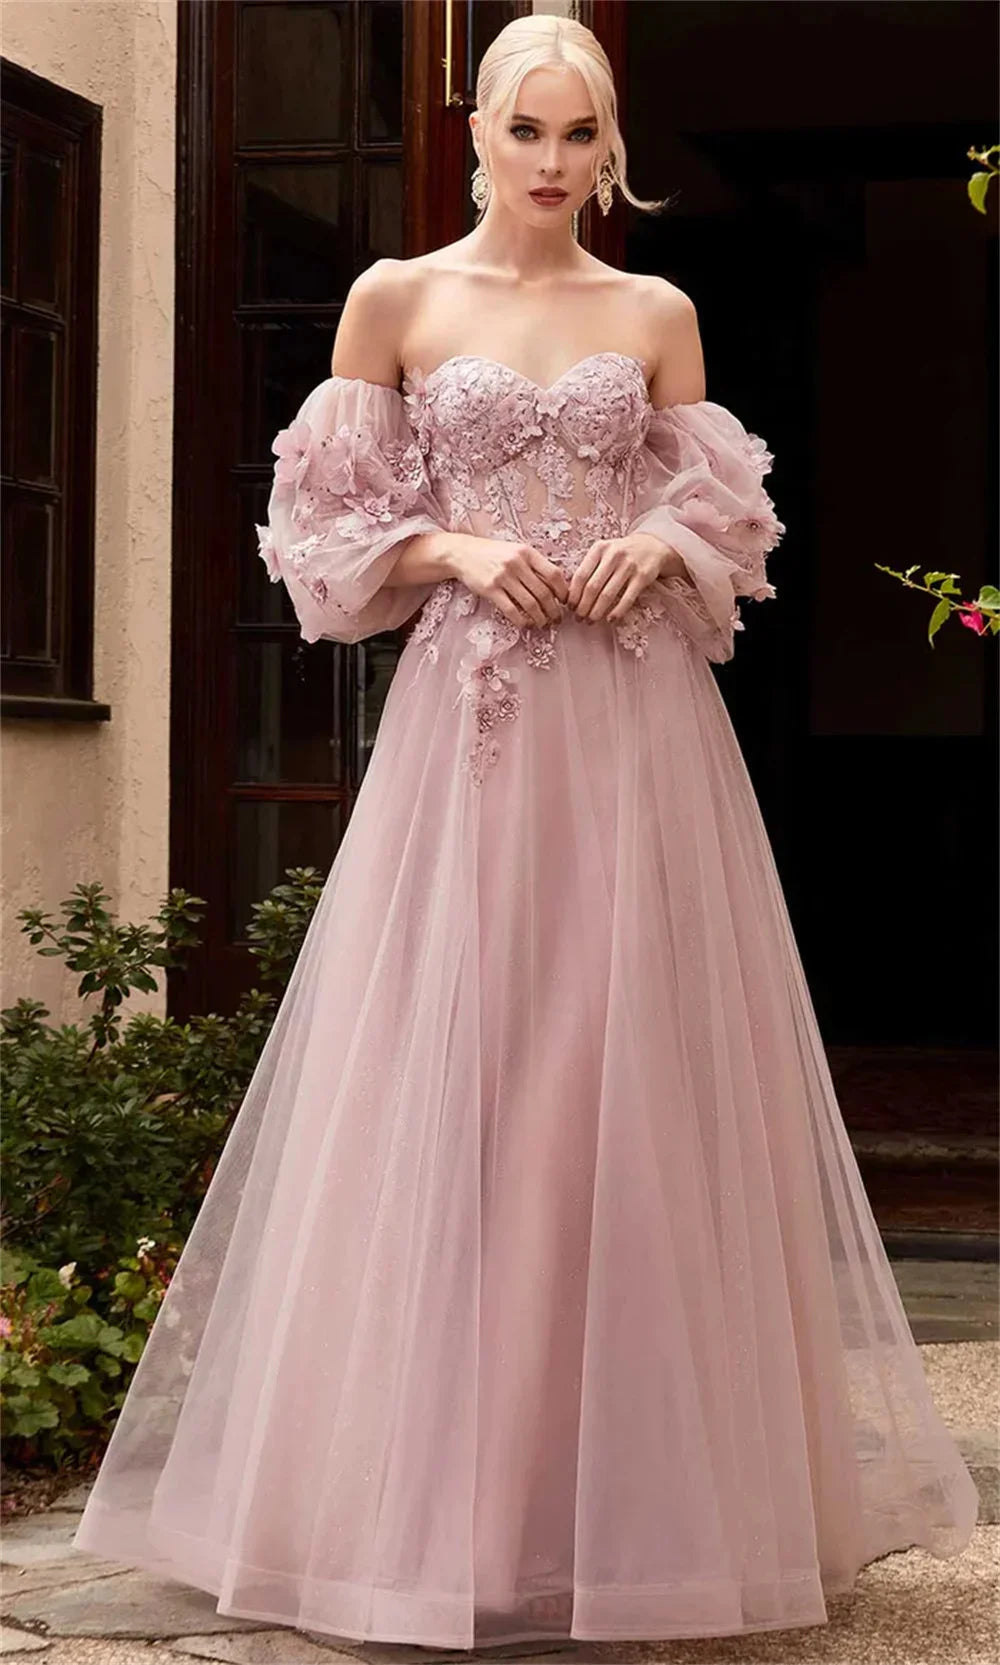 Pink Off Shoulder Tulle Prom Dress Elegant Lace Embroidery A-line vestidos par boda Sweetheart Puffy Sleeves Wedding Dress